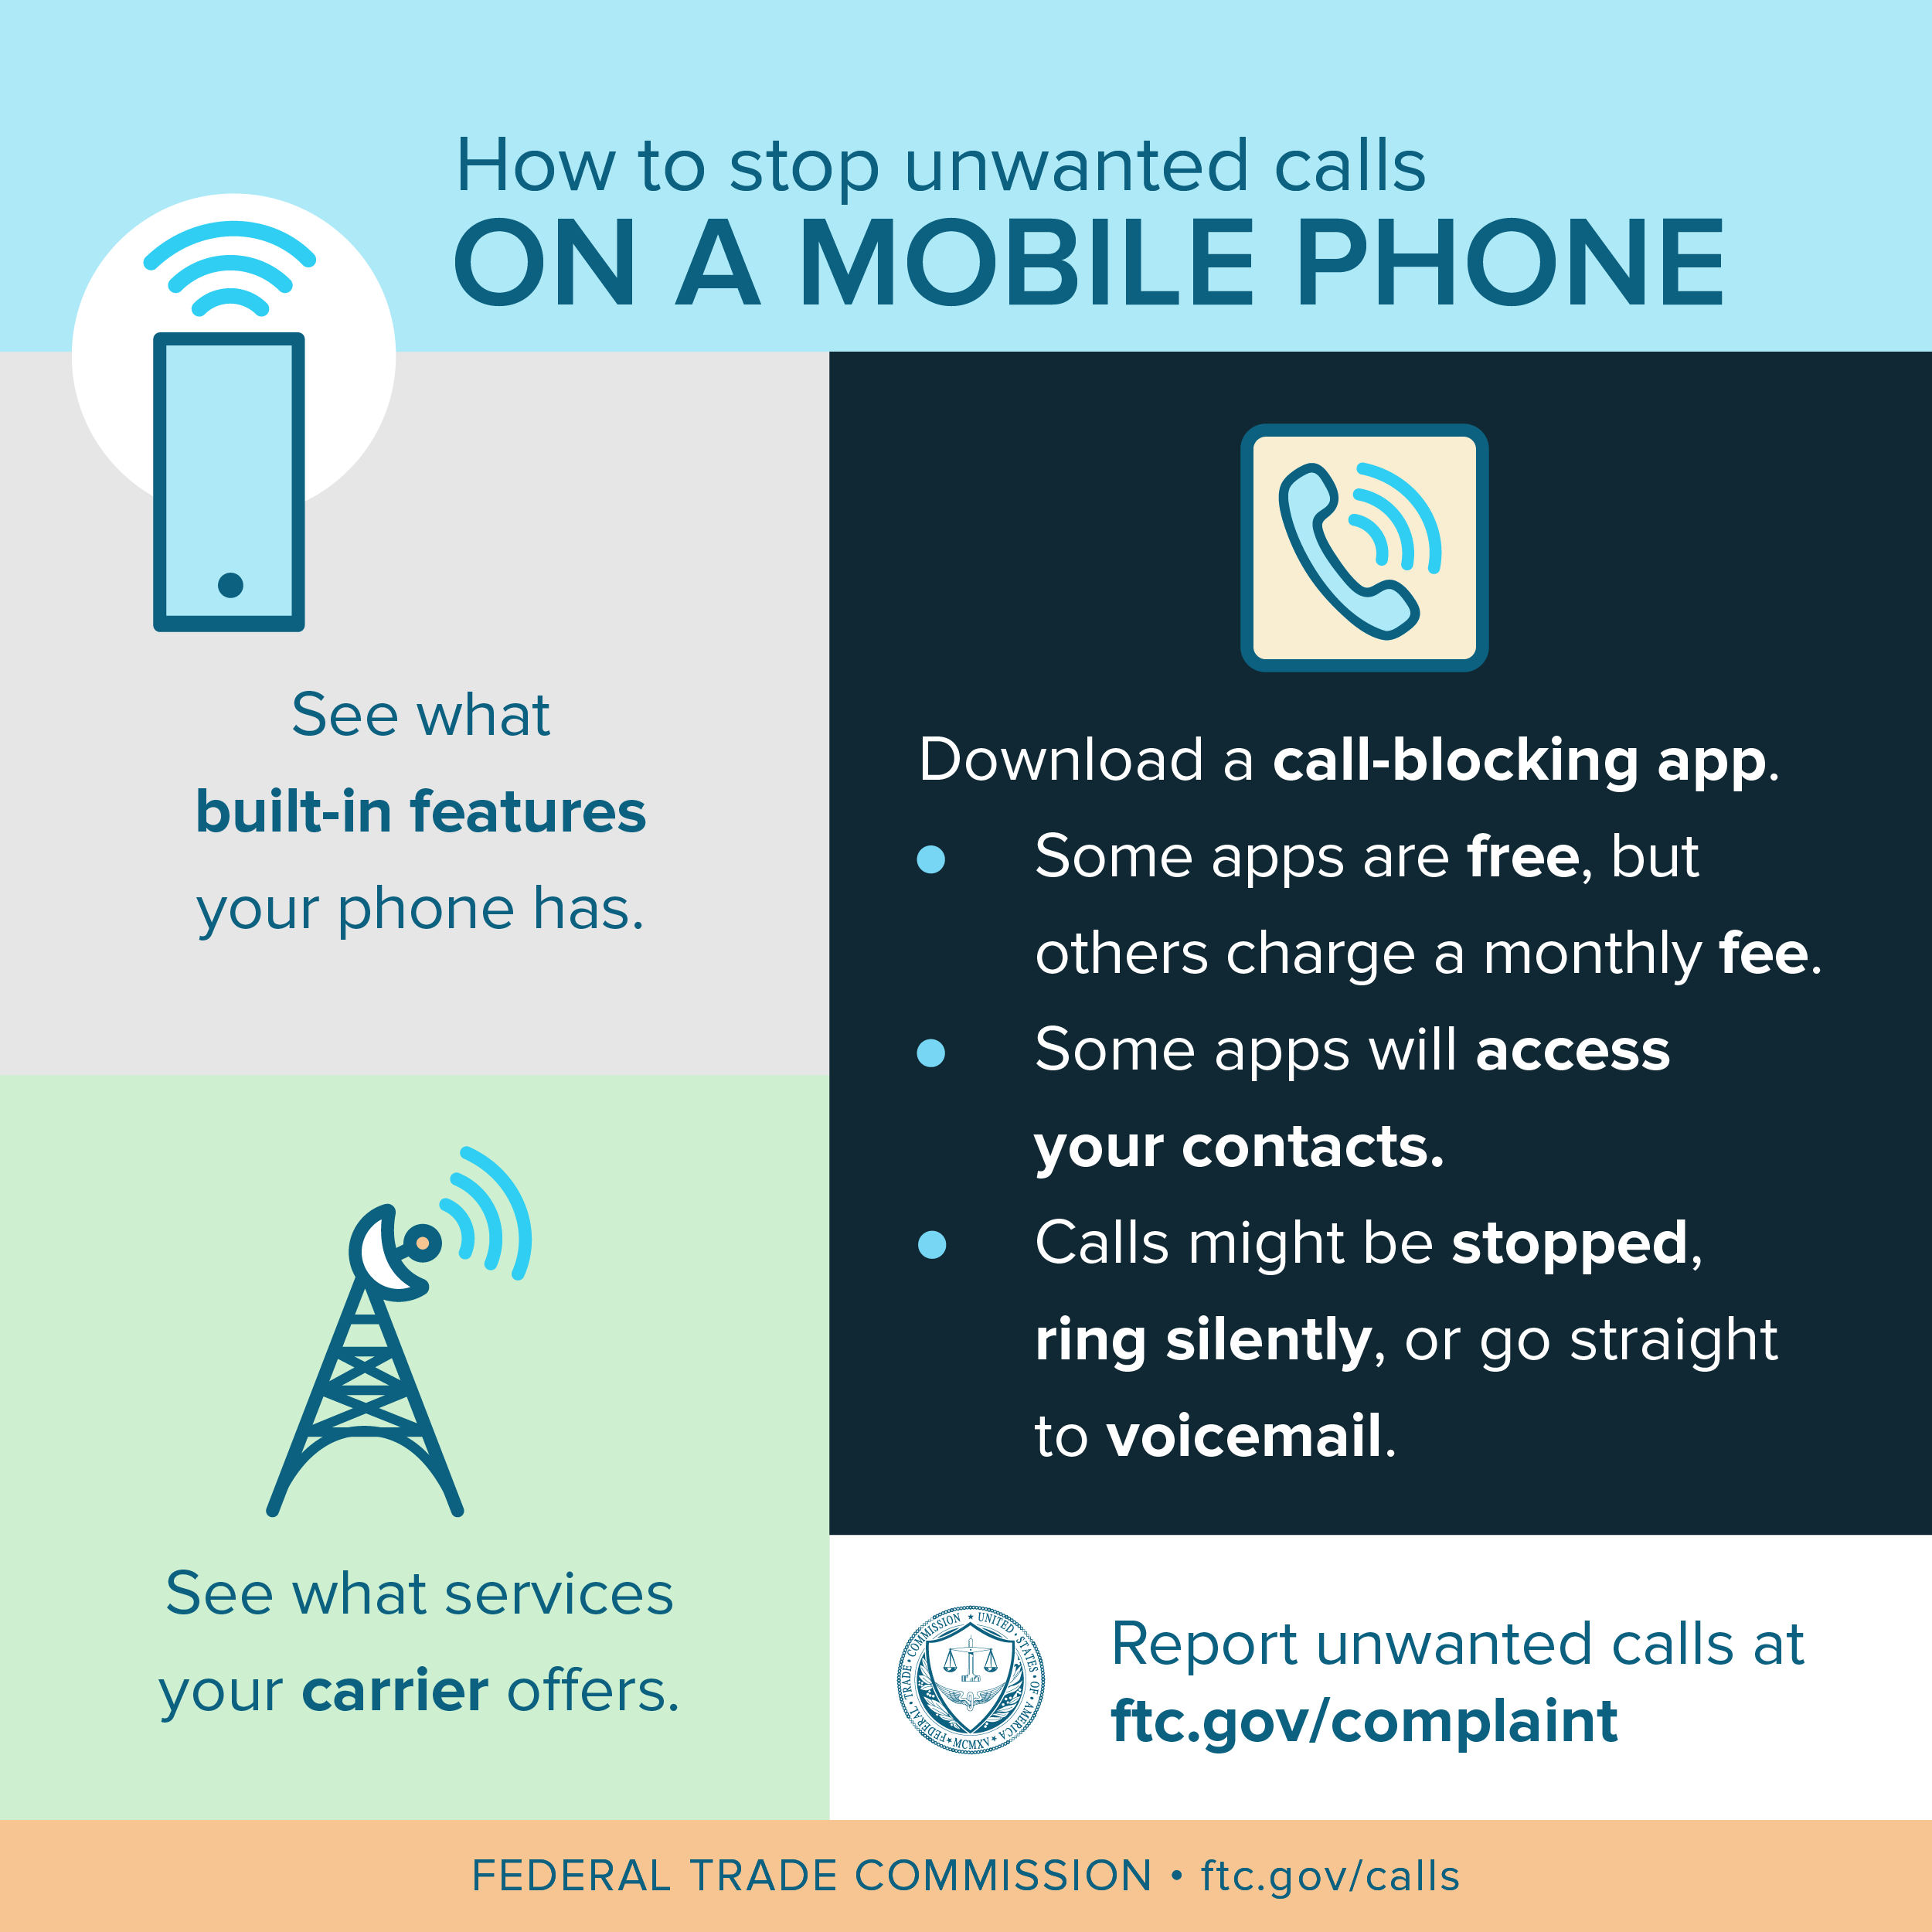 How to stop unwanted calls ON A MOBILE PHONE Report unwanted calls at ftc.gov/complaint FEDERAL TRADE COMMISSION  ftc.gov/calls See what built-in features your phone has. See what services your carrier oers. Download a call-blocking app. • Some apps are free, but others charge a monthly fee. • Some apps will access your contacts. • Calls might be stopped, ring silently, or go straight to voicemail.